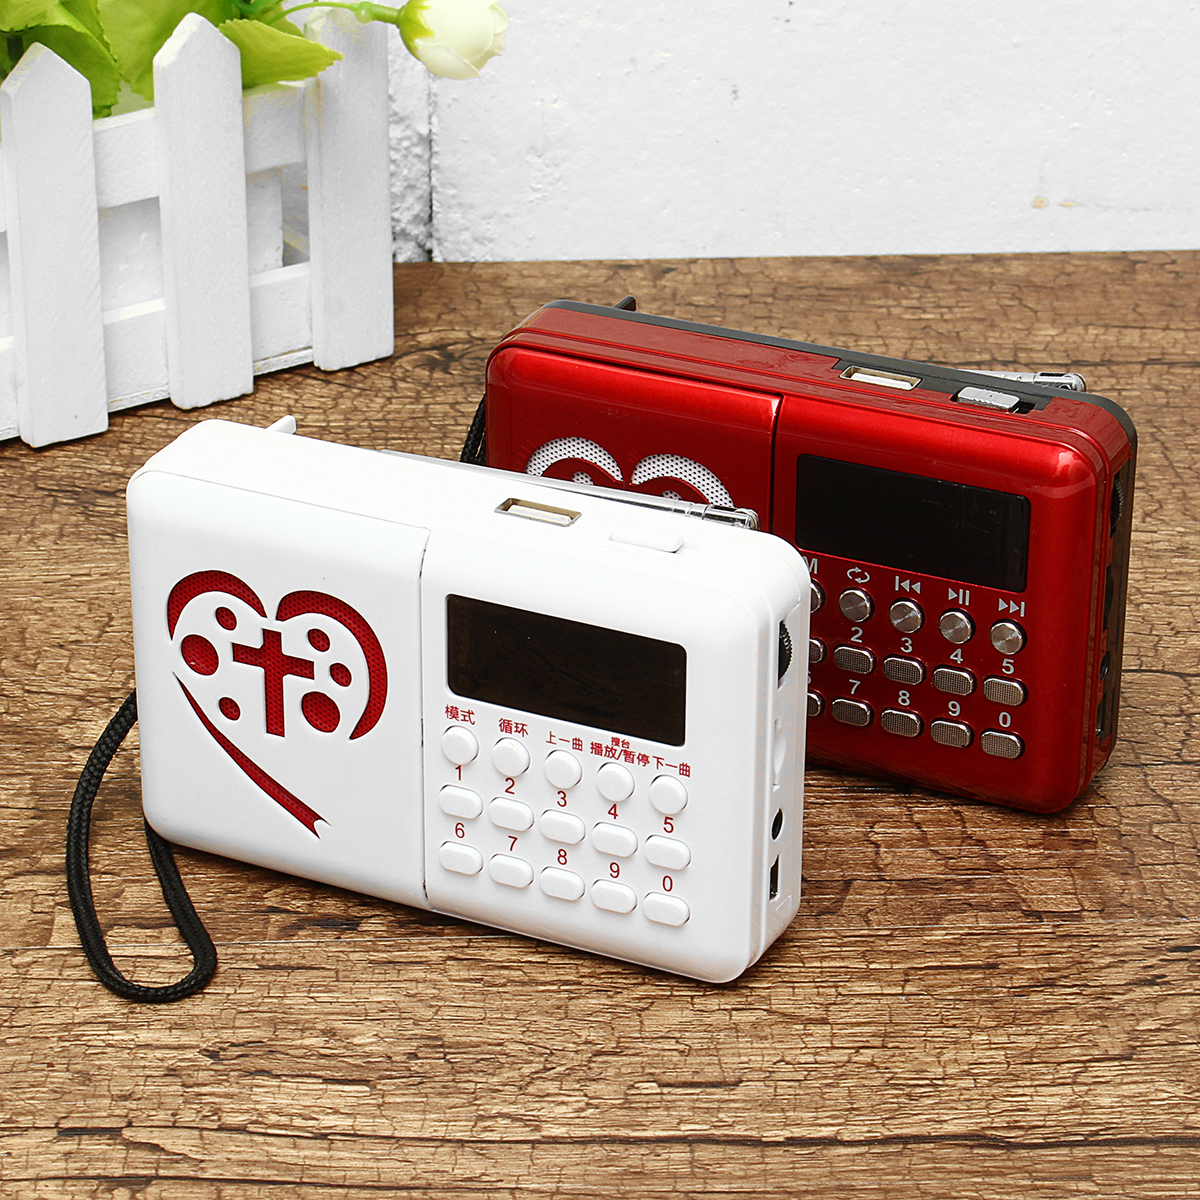 Electronic-Bible-Audio-MP3-Player-LED-Screen-Rechargeable-Mini-Radio-TF-Card-1357629